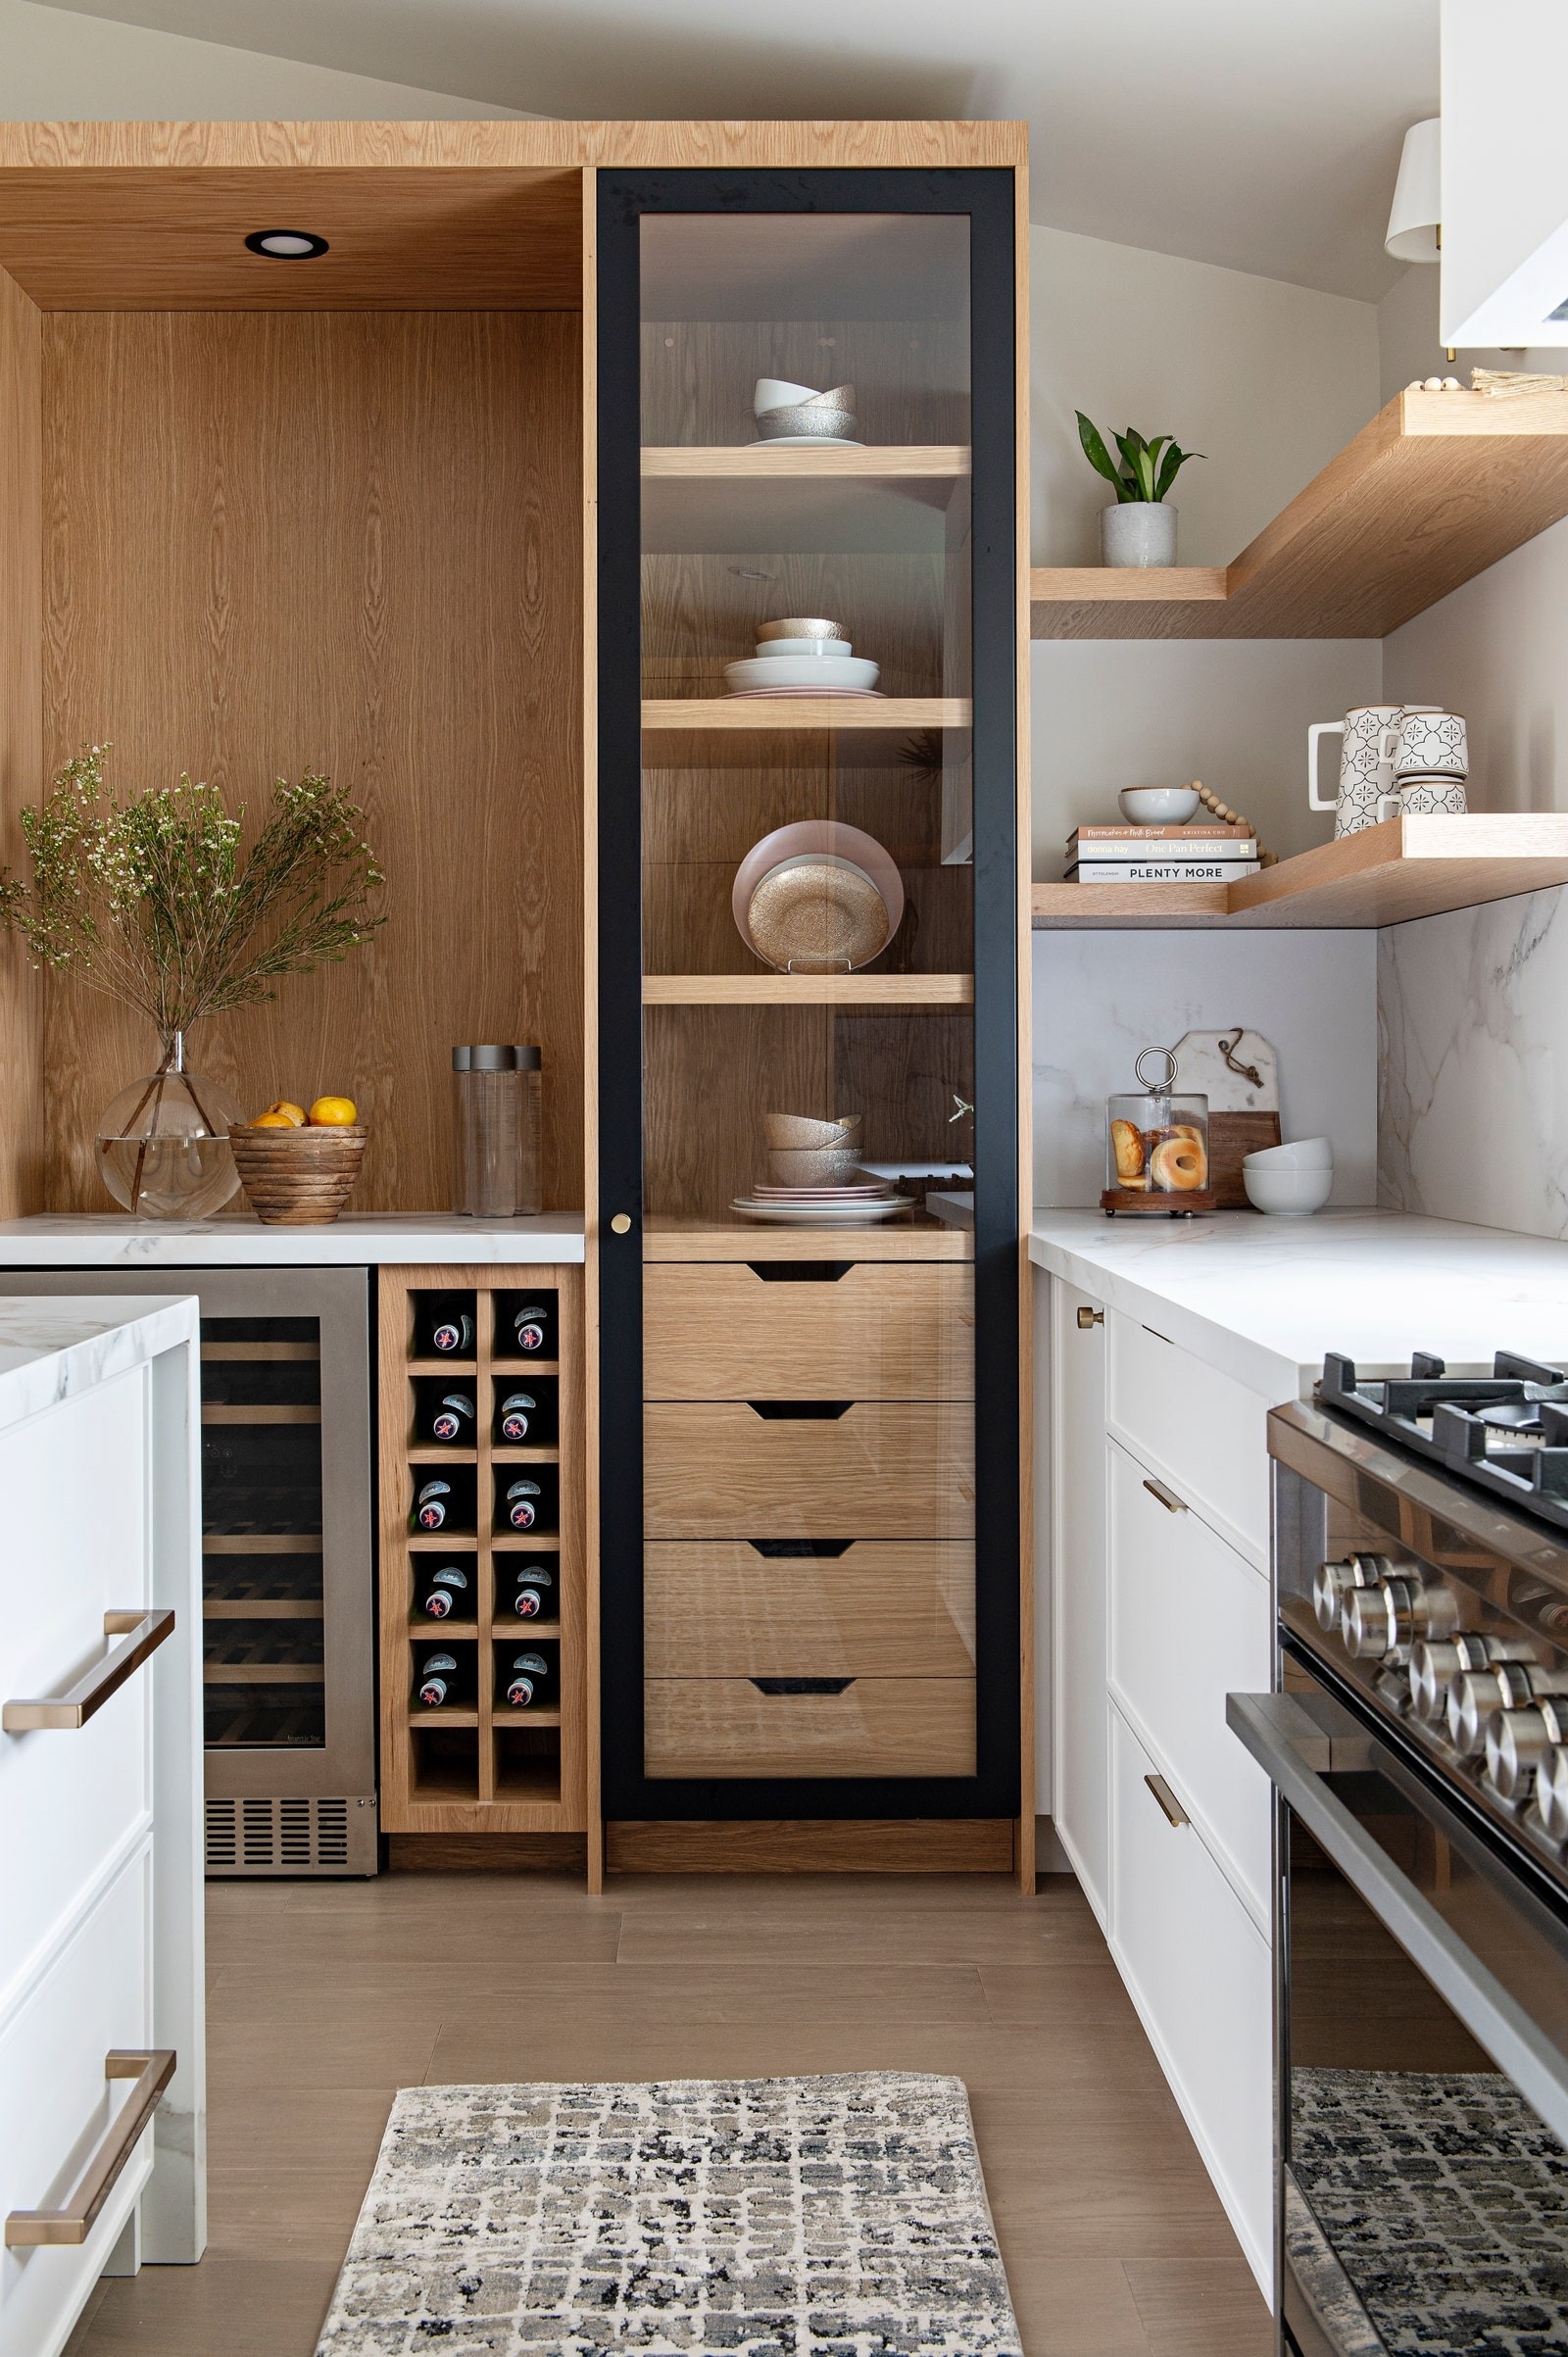 39 Kitchen Cabinet Design Ideas To Give Your Space An Ultimate